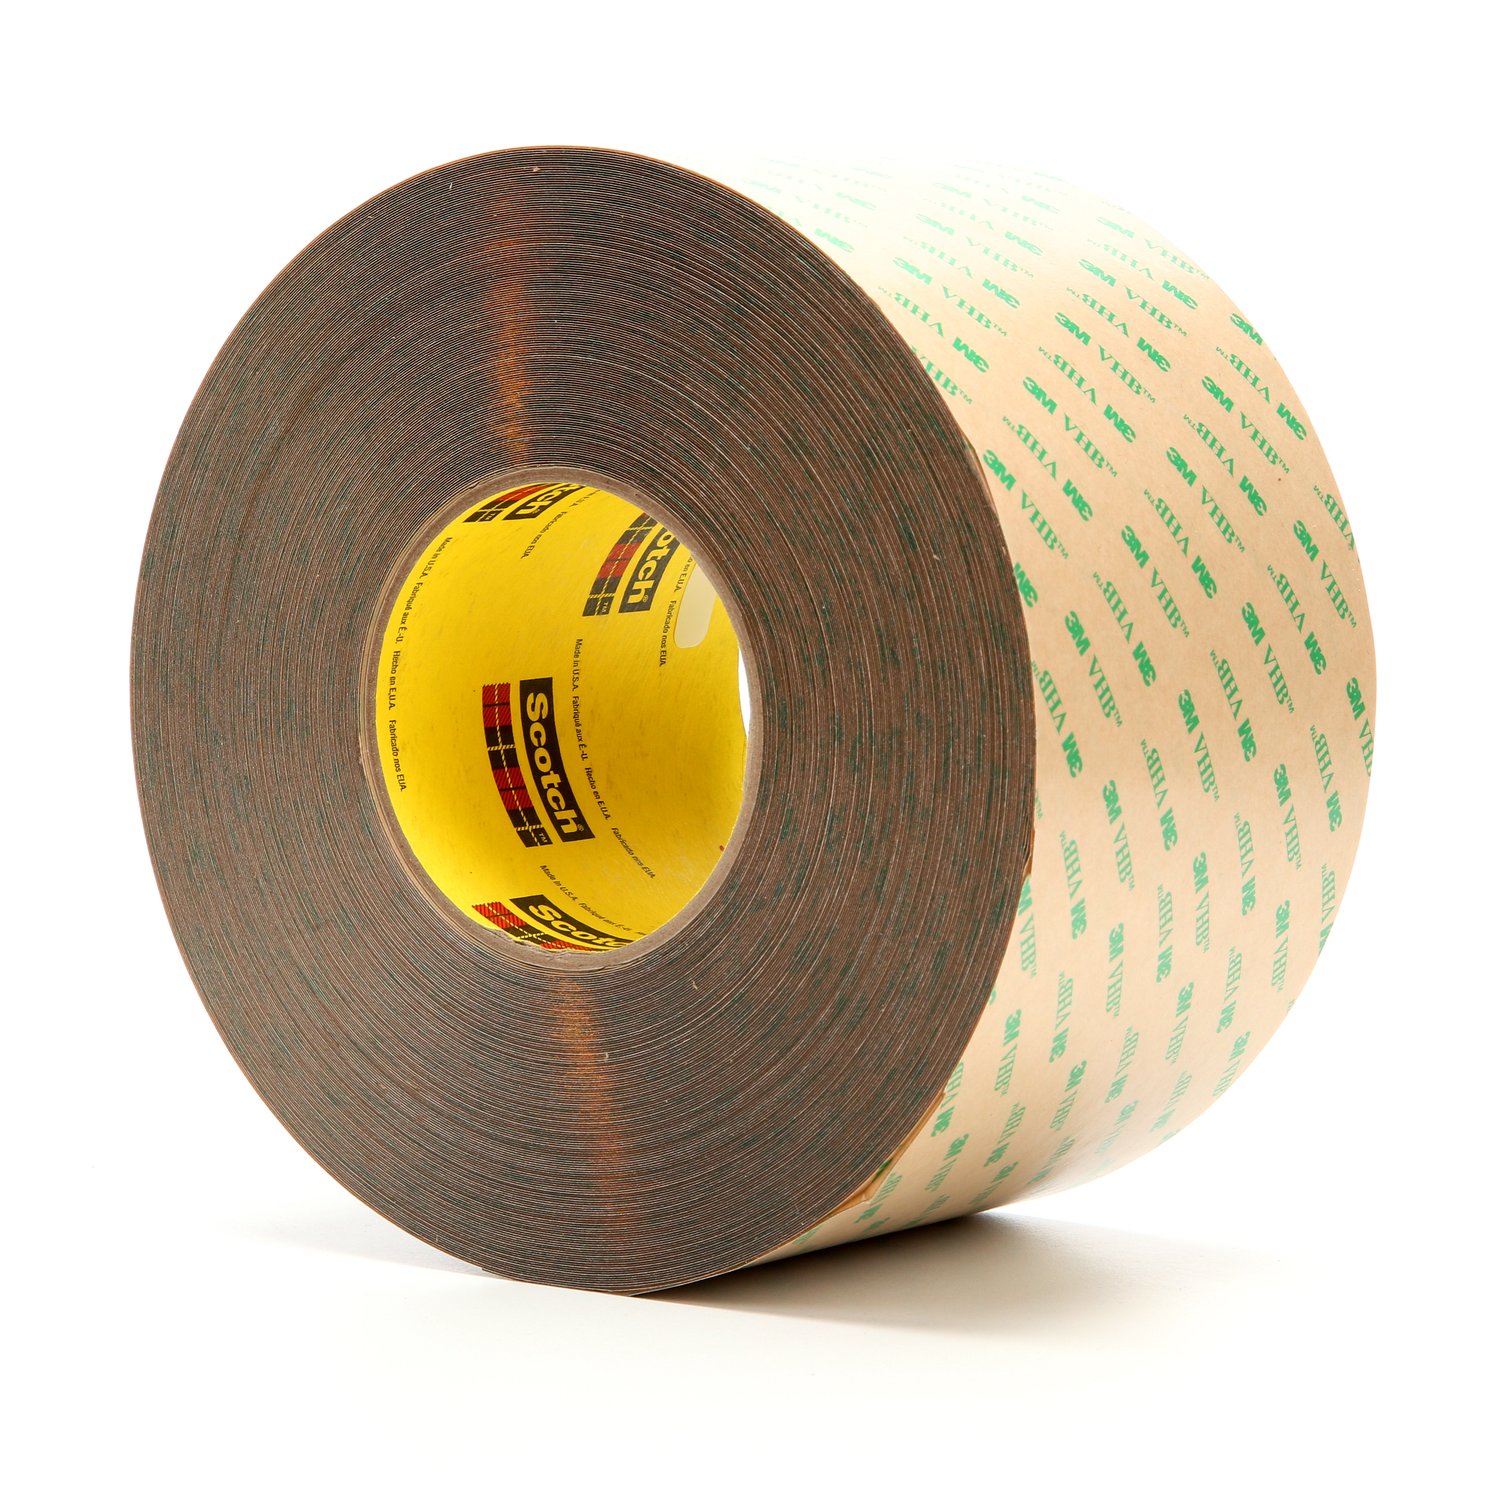 7010373426 - 3M VHB Adhesive Transfer Tape F9473PC, Clear, 4 in x 60 yd, 10 Mil,
2/Case